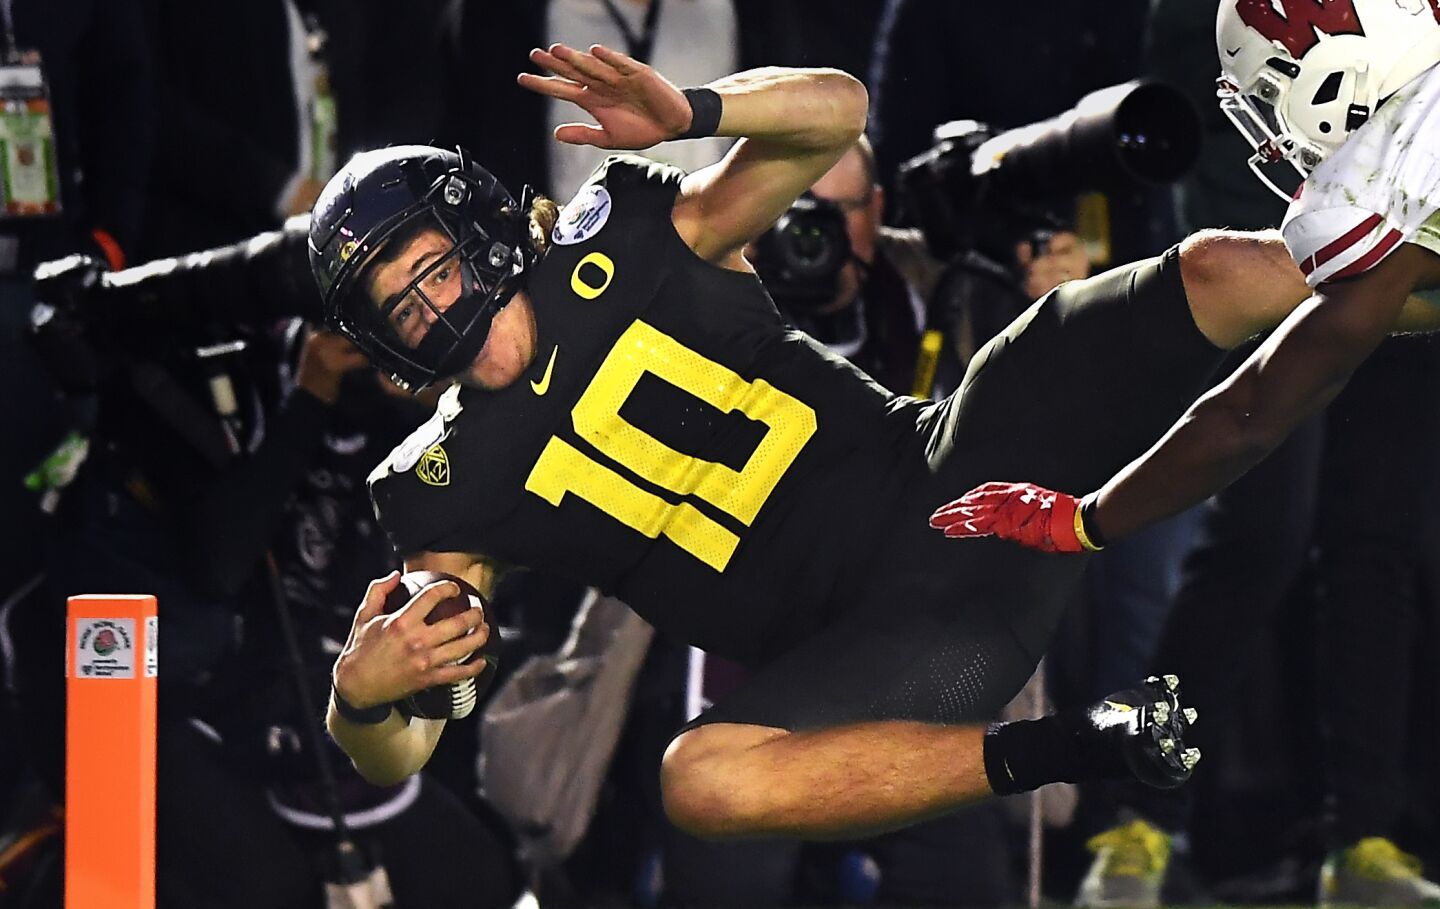 Oregon quarterback Justin Herbert scores the go-ahead touchdown in front of Wisconsin cornerback Faion Hicks during the fourth quarter.